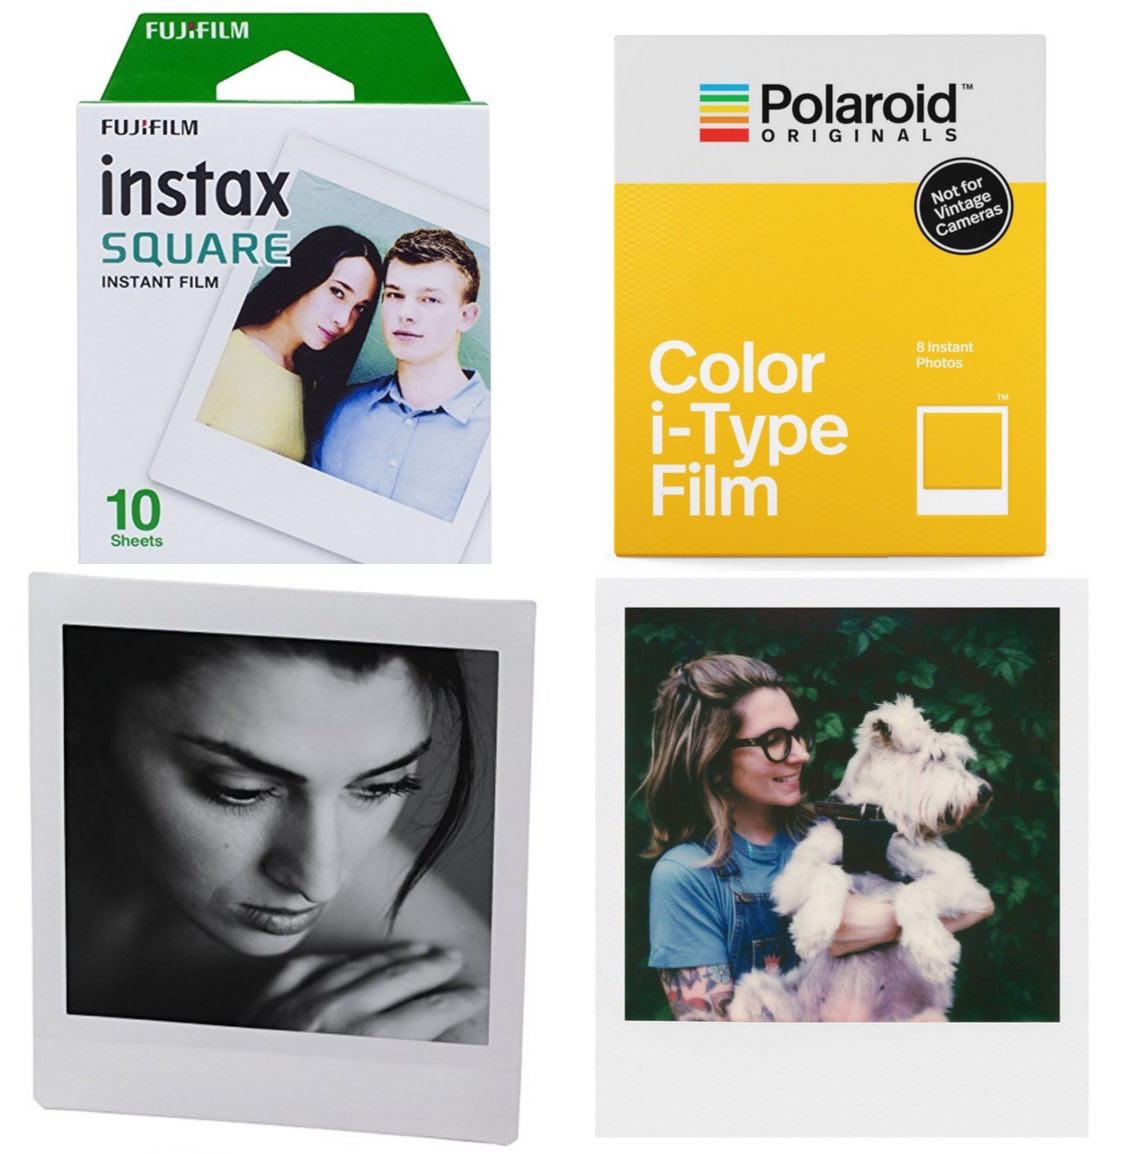 rotatie cent Geboorteplaats Polaroid Wants Fujifilm to Pay Millions of Dollars in Annual Royalty for  Instant Square Film Borders, Reports Say - Fuji Rumors